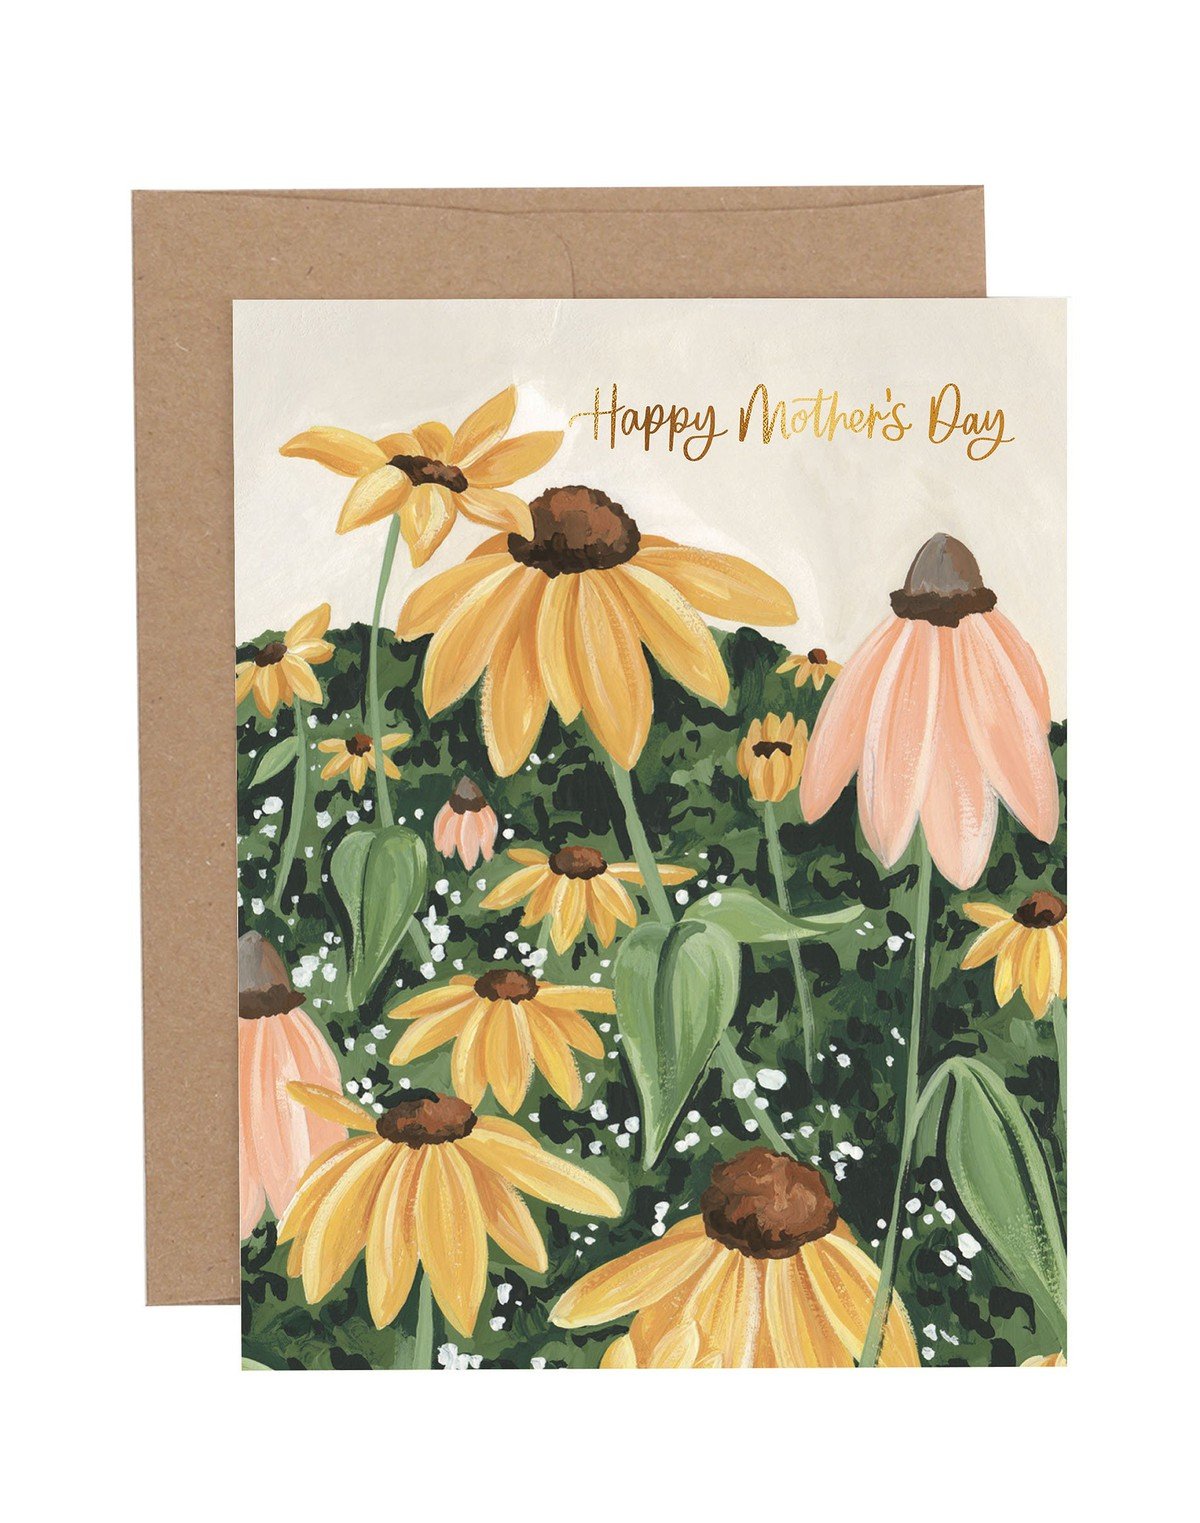 Happy Mother's Day Windy Hills Greeting Card item